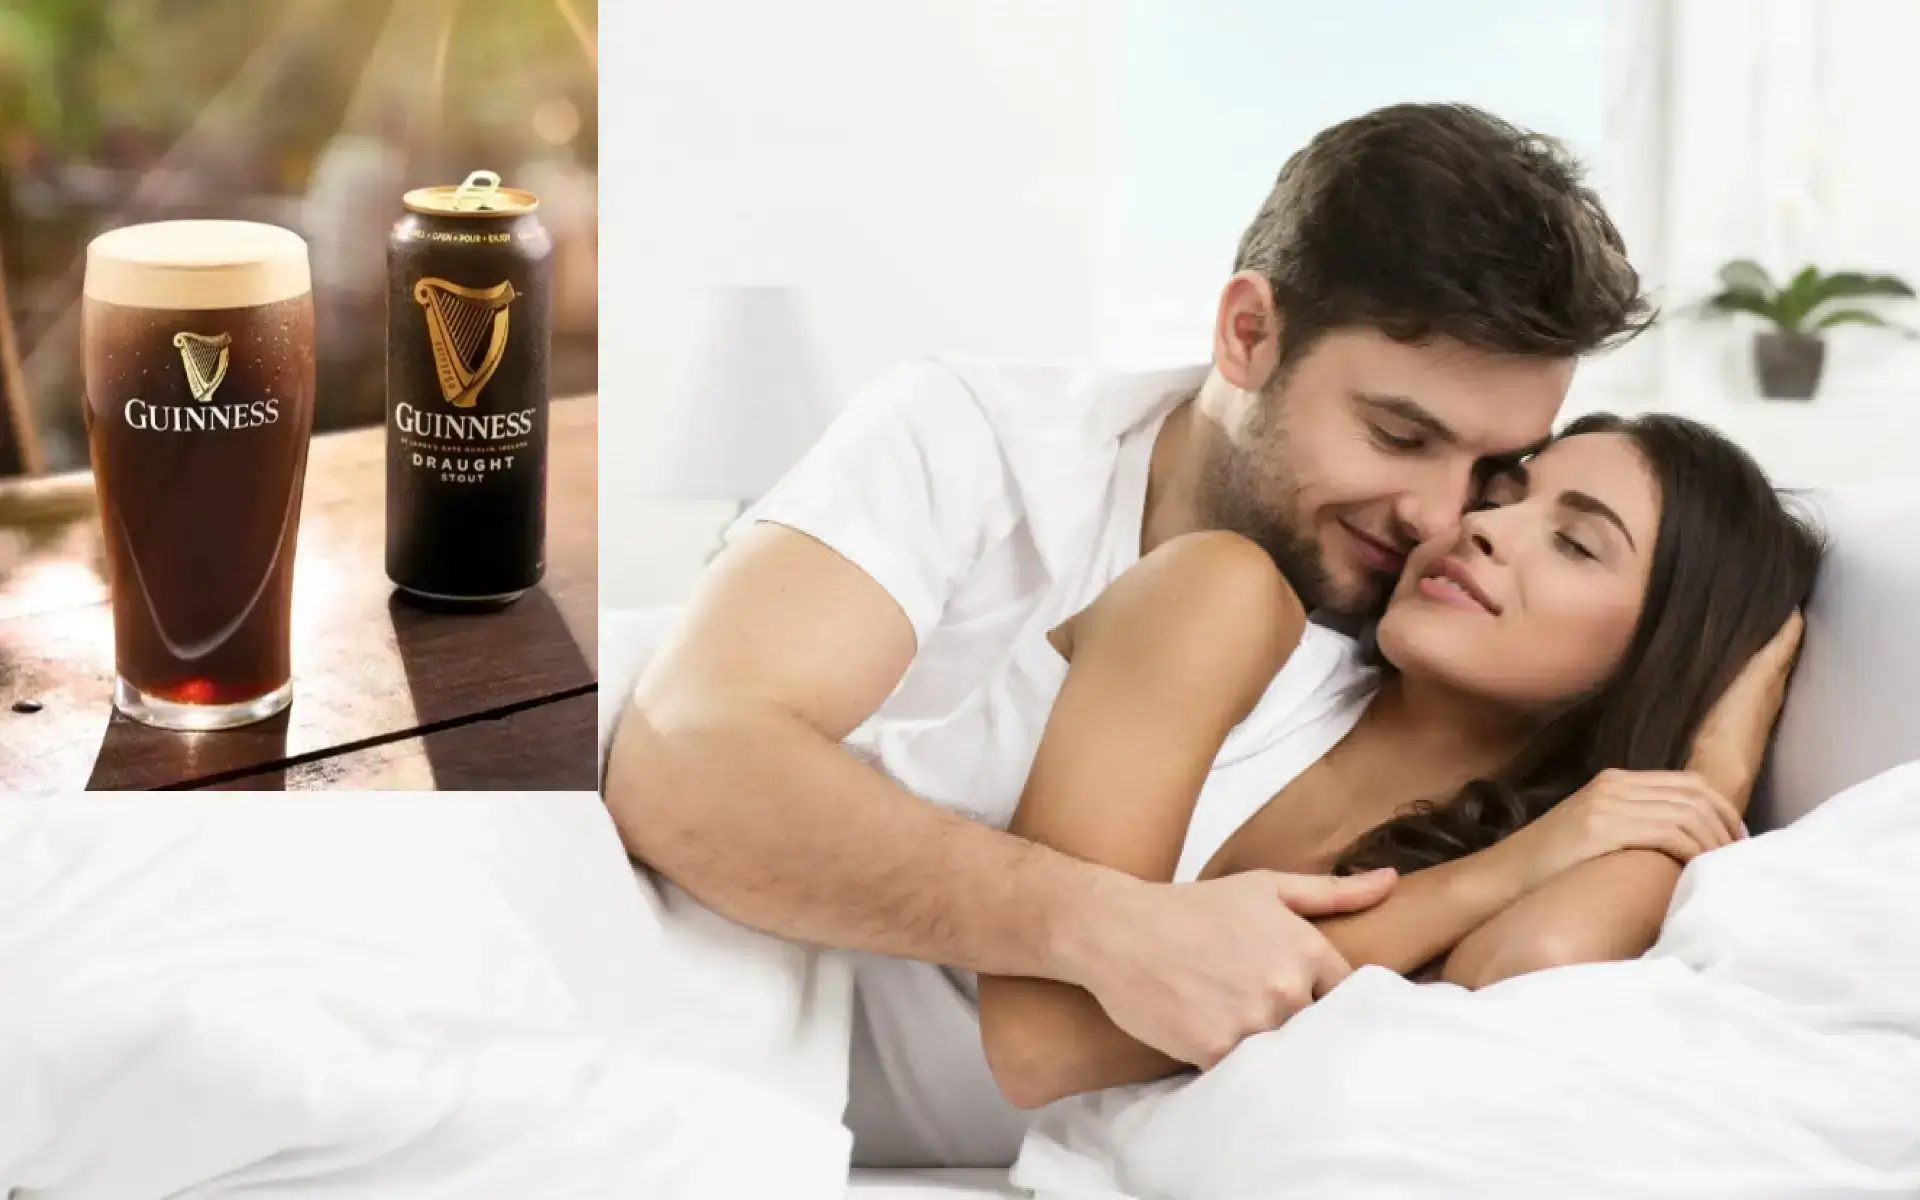 Drink Guinness for a Boost in Bedroom Performance, Doctor Suggests